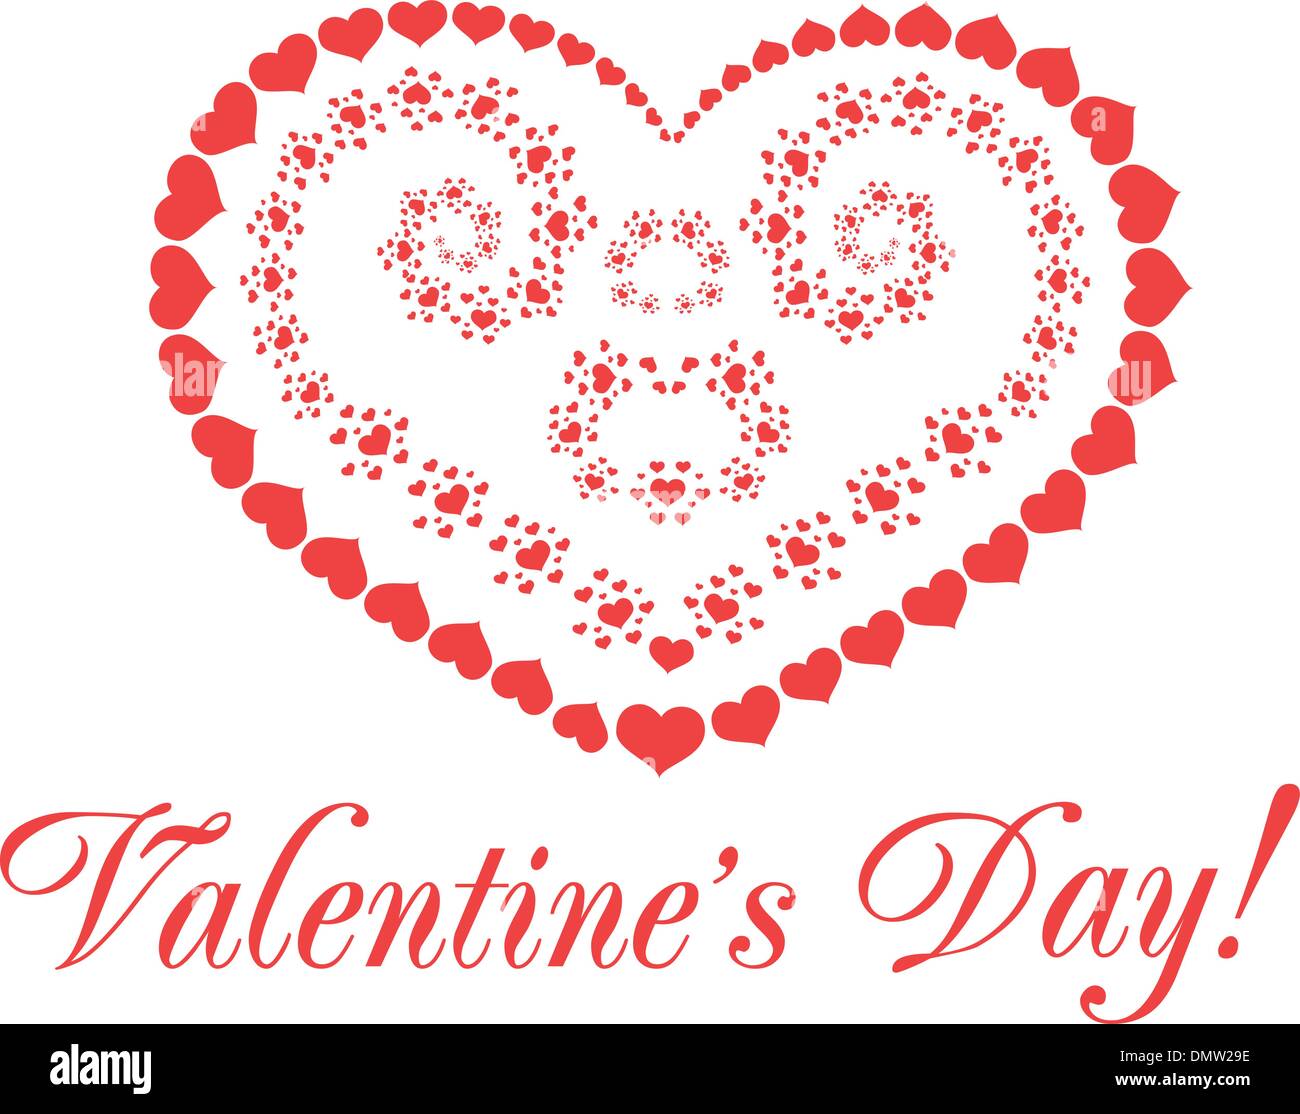 Valentine's day vector background with hearts Stock Vector